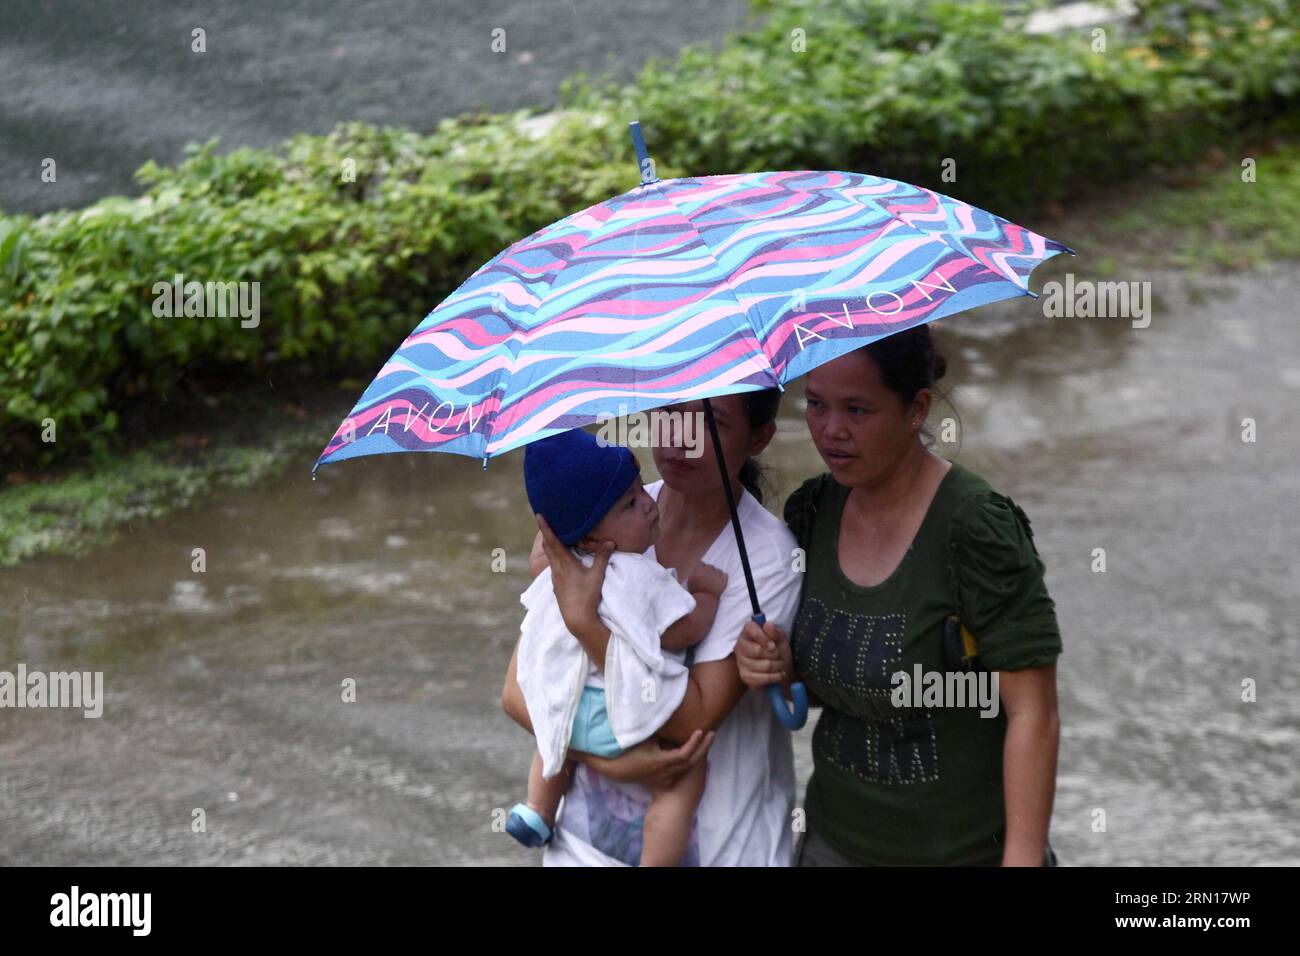 (141204) -- QUEZON CITY, Dec. 4, 2014 -- People walk with an umbrella in the rain in Quezon City, the Philippines, on Dec. 4, 2014. Typhoon Hagupit is packing maximum winds of 205 kph near the center and gustiness of up to 240 kph. The Philippine government will implement forced evacuation in areas that are expected to be hit by typhoon Hagupit (local name Ruby ), a senior government official said Thursday. ) PHILIPPINES-QUEZON CITY-TYPHOON-HAGUPIT RouellexUmali PUBLICATIONxNOTxINxCHN   Quezon City DEC 4 2014 Celebrities Walk With to Umbrella in The Rain in Quezon City The Philippines ON DEC 4 Stock Photo